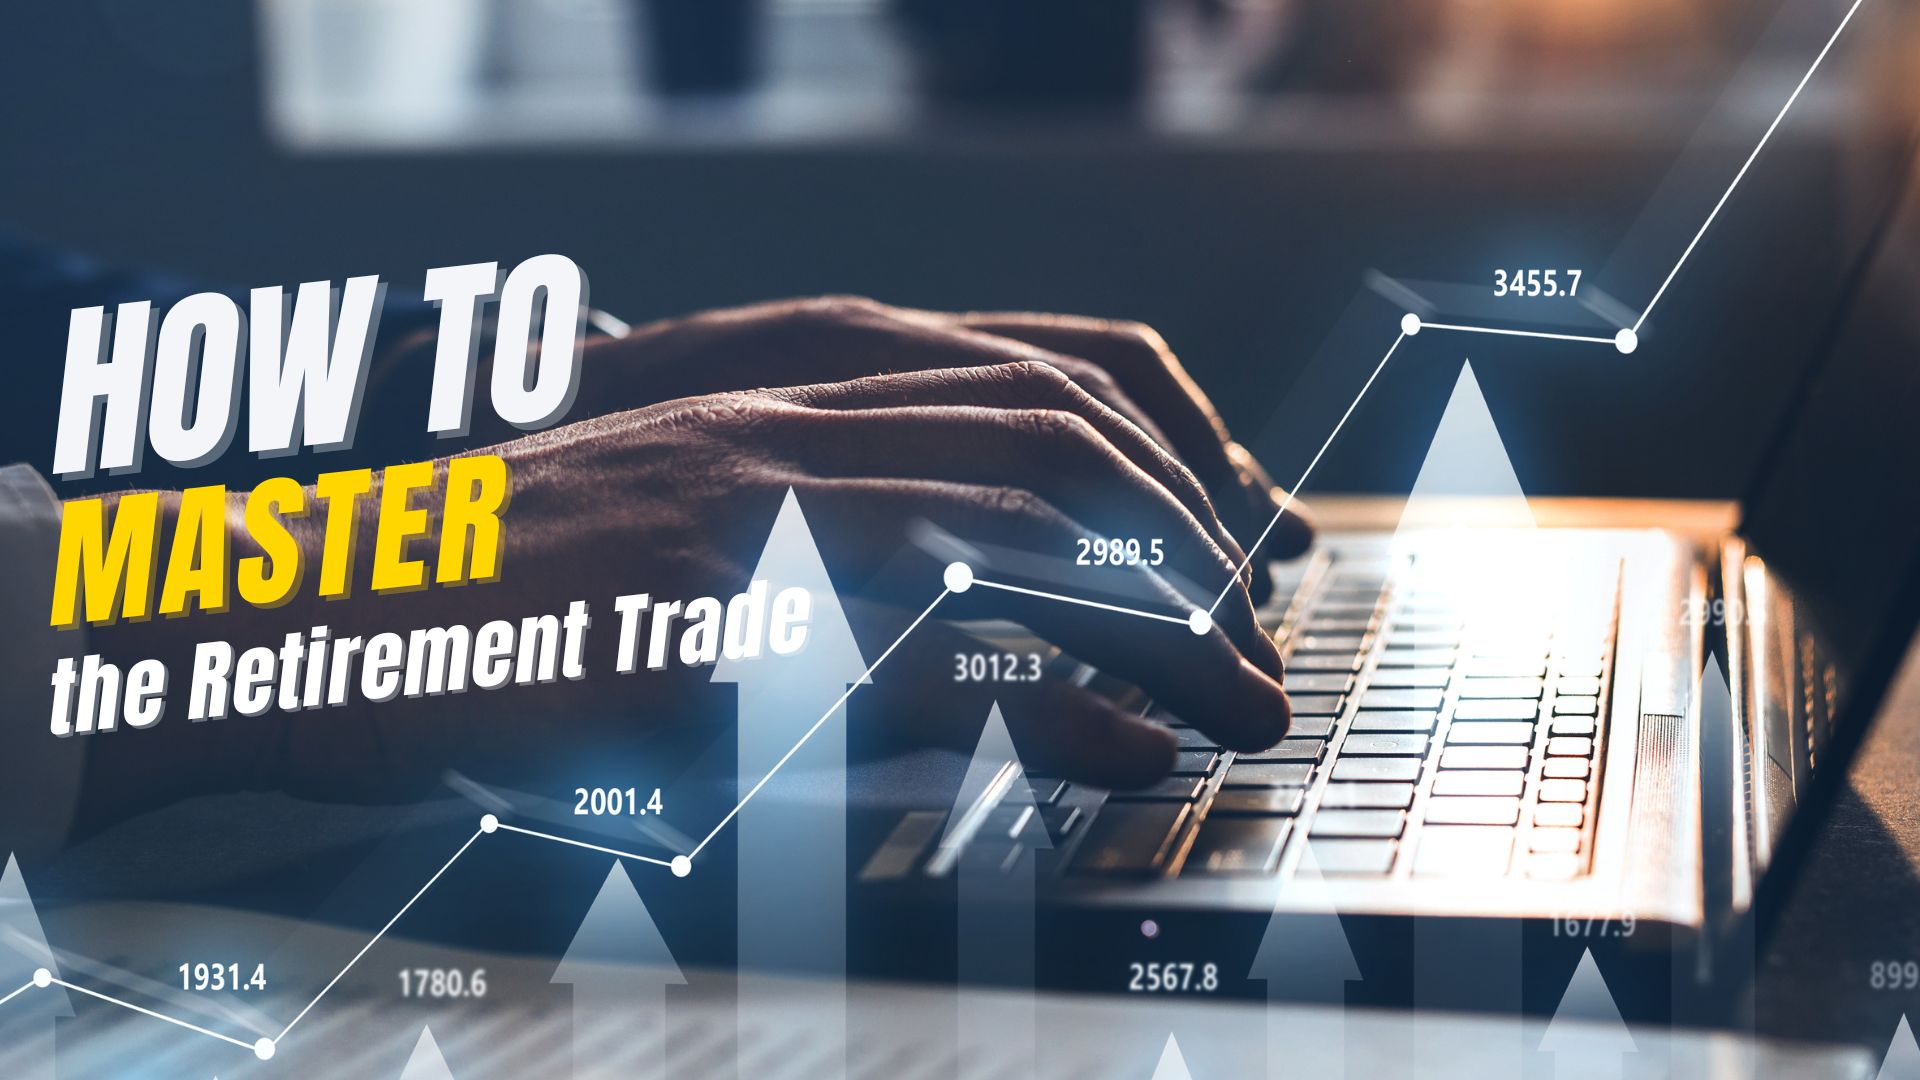 How to Master the Retirement Trade